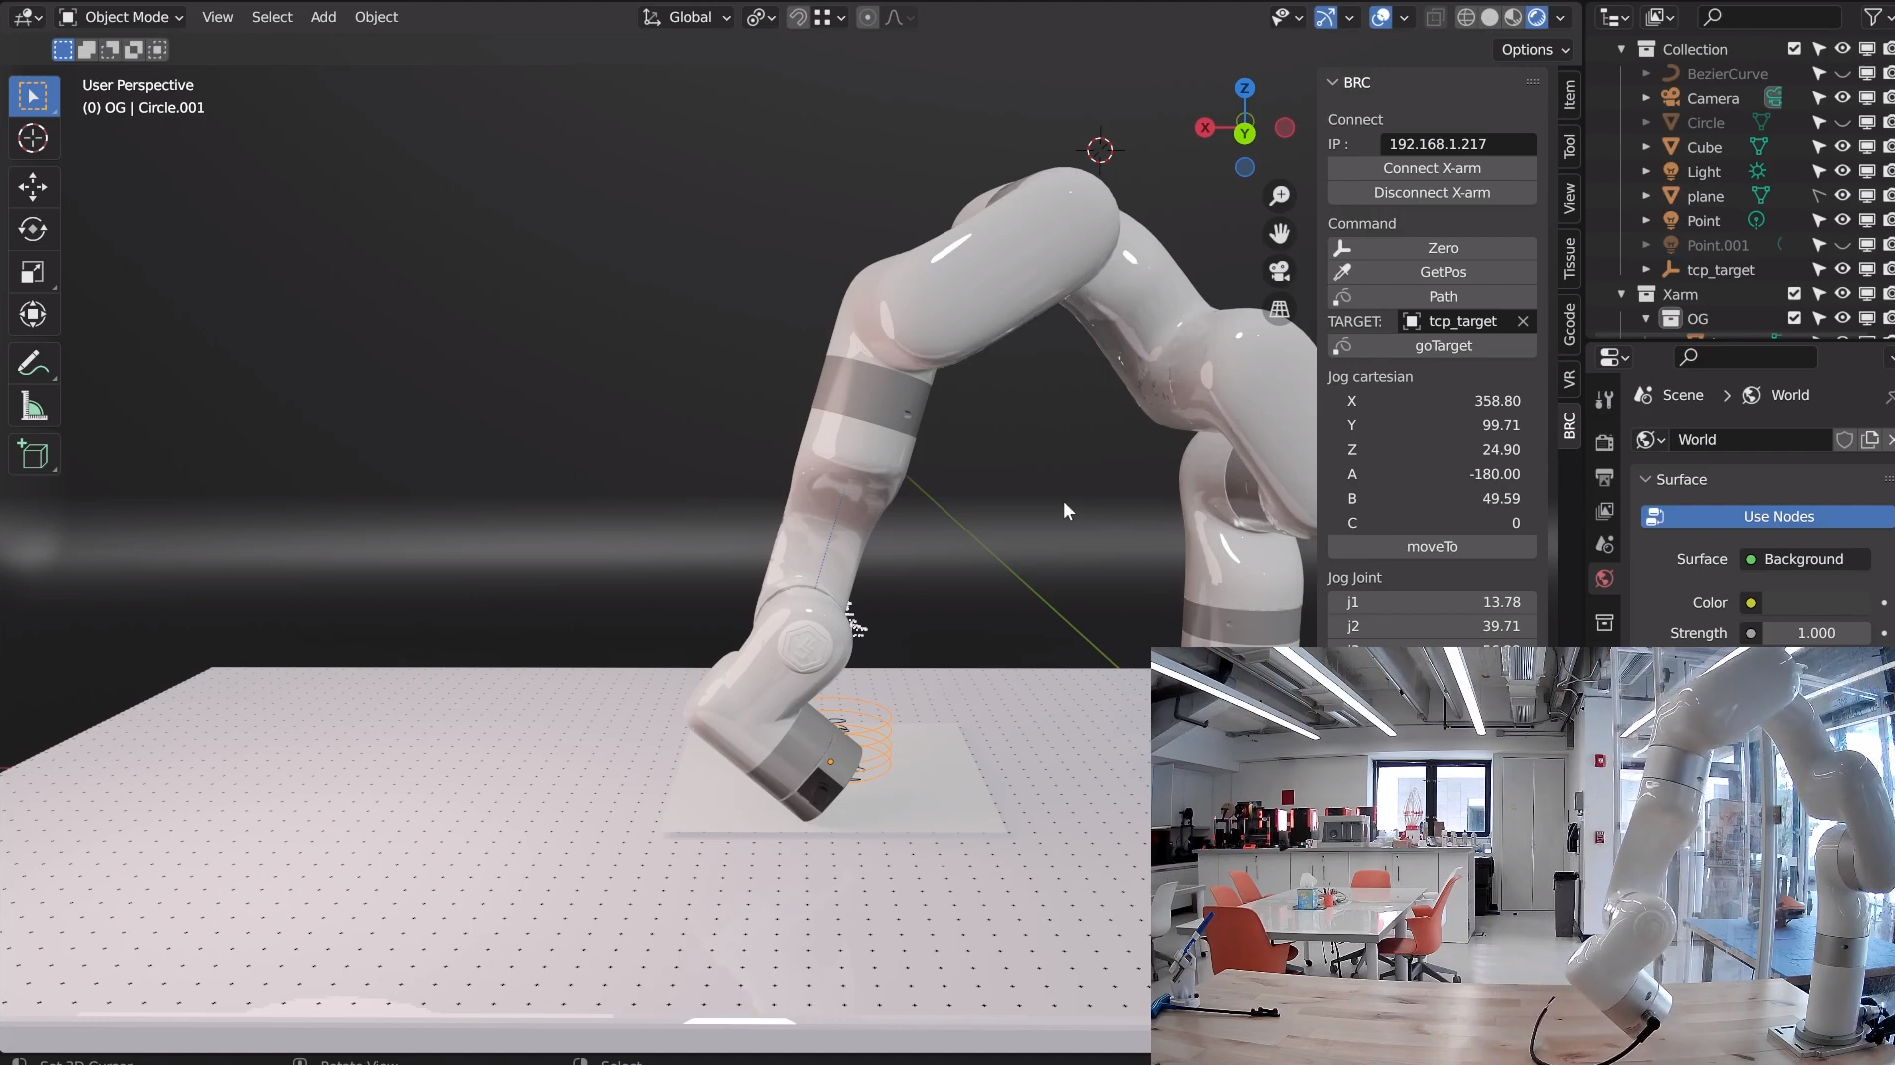 Blender as a research tool for Robot Control and toolpathing - BlenderNation